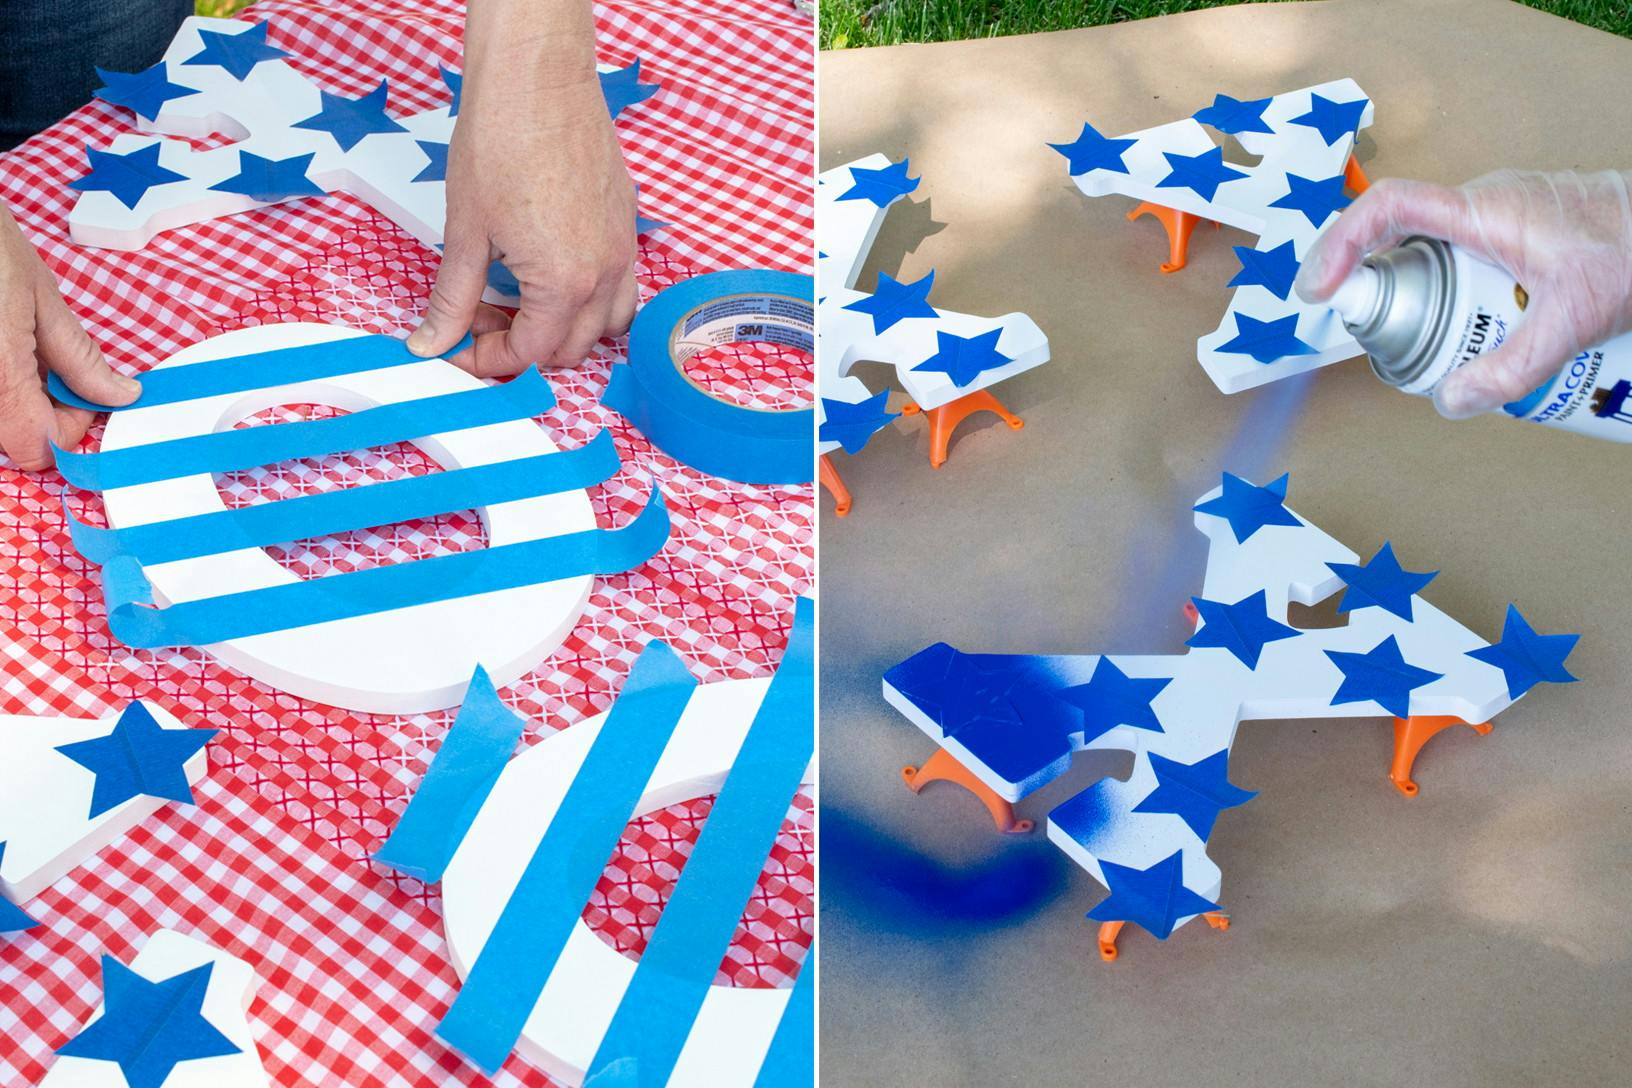 A person placing painters tape in a stripe pattern on a wooden O next to another striped O and some Xs with painters tape stars stuck on them. And a person using blue spray paint on the wooden Xs sitting on cardboard outside.